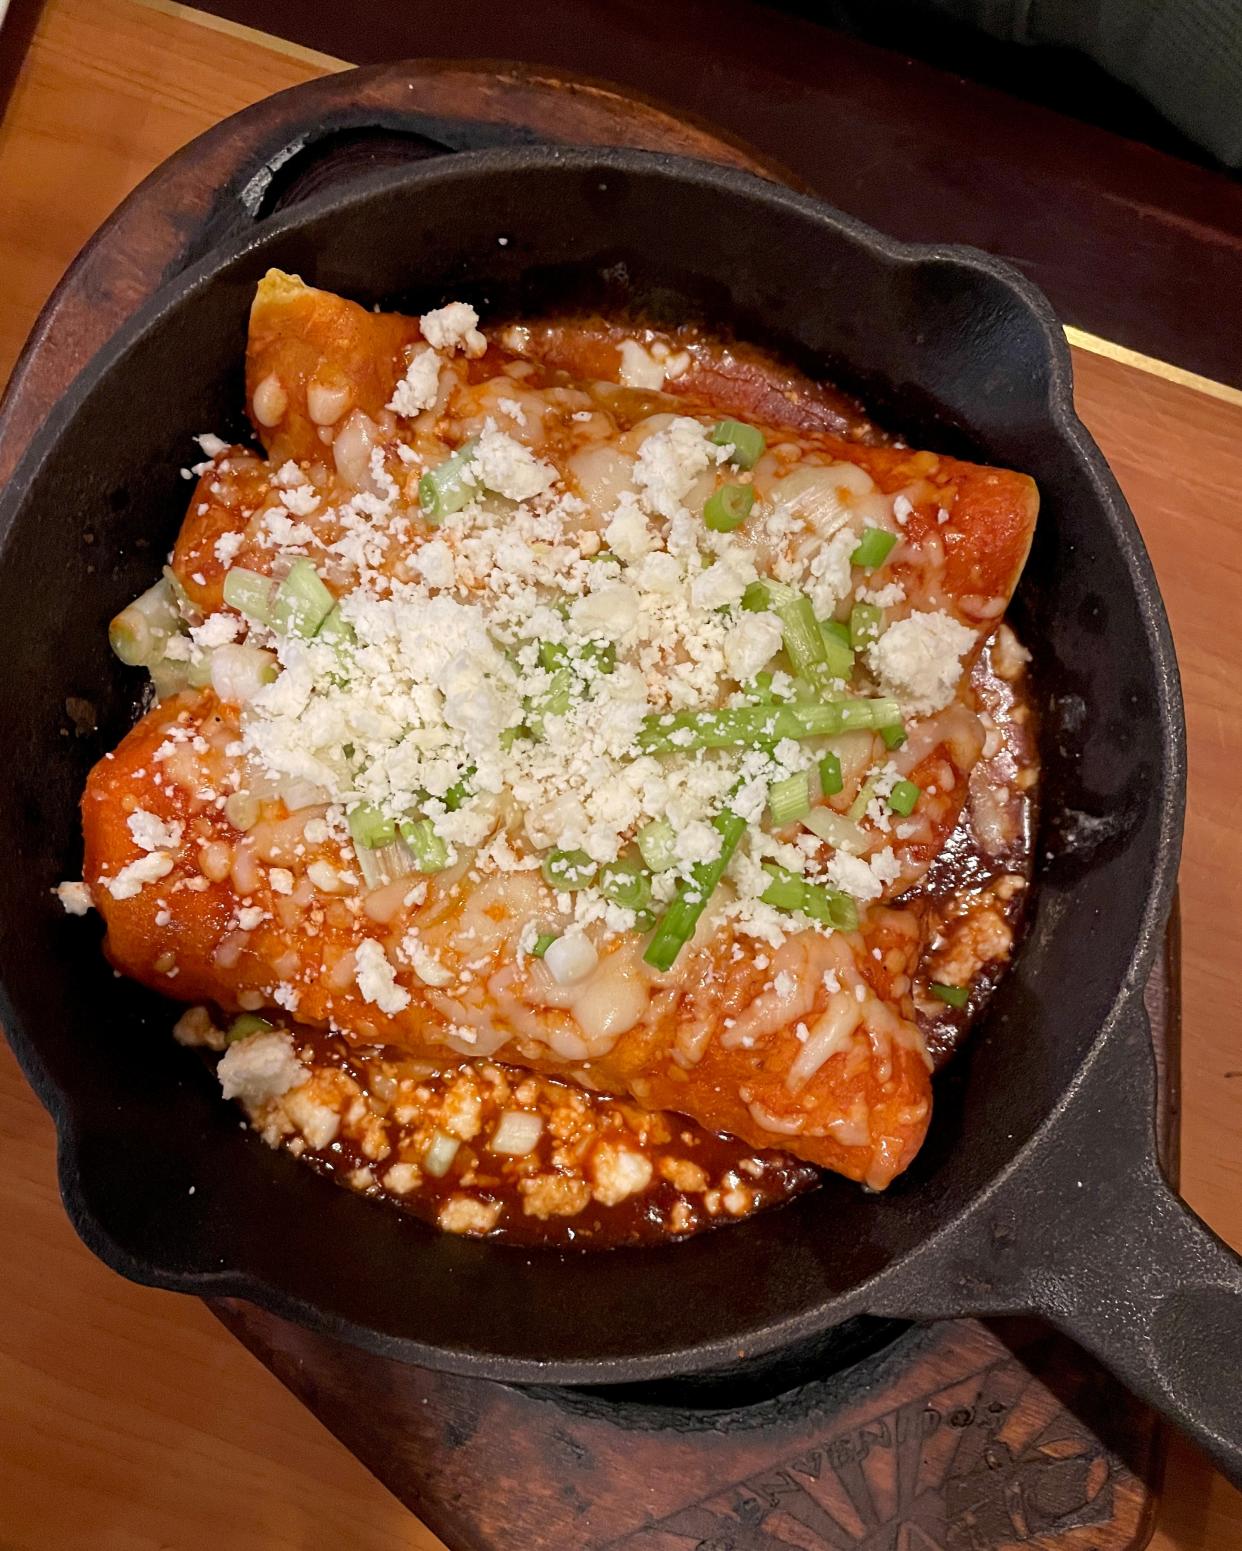 The enchiladas cazerola Mexicana includes three enchiladas (with shredded chicken, pork, beef, cheese or beans inside) with red sauce, sour cream, green onions and guacamole. It’s served with a plate of rice on the side.